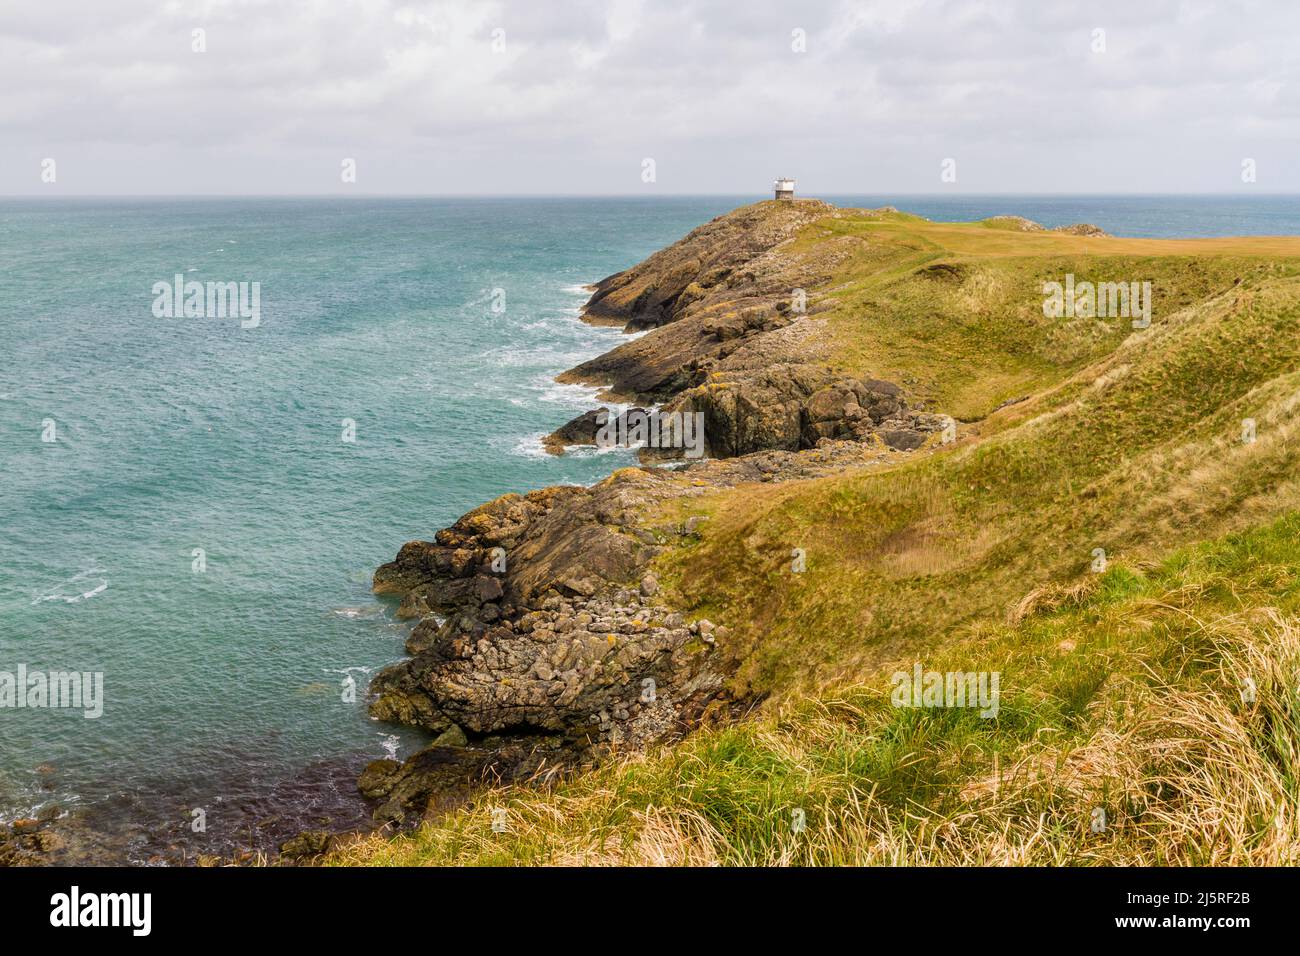 View over the northern end of Porthdinllaen peninsula with coastguard lookout in distance, North Wales, landscape. Stock Photo